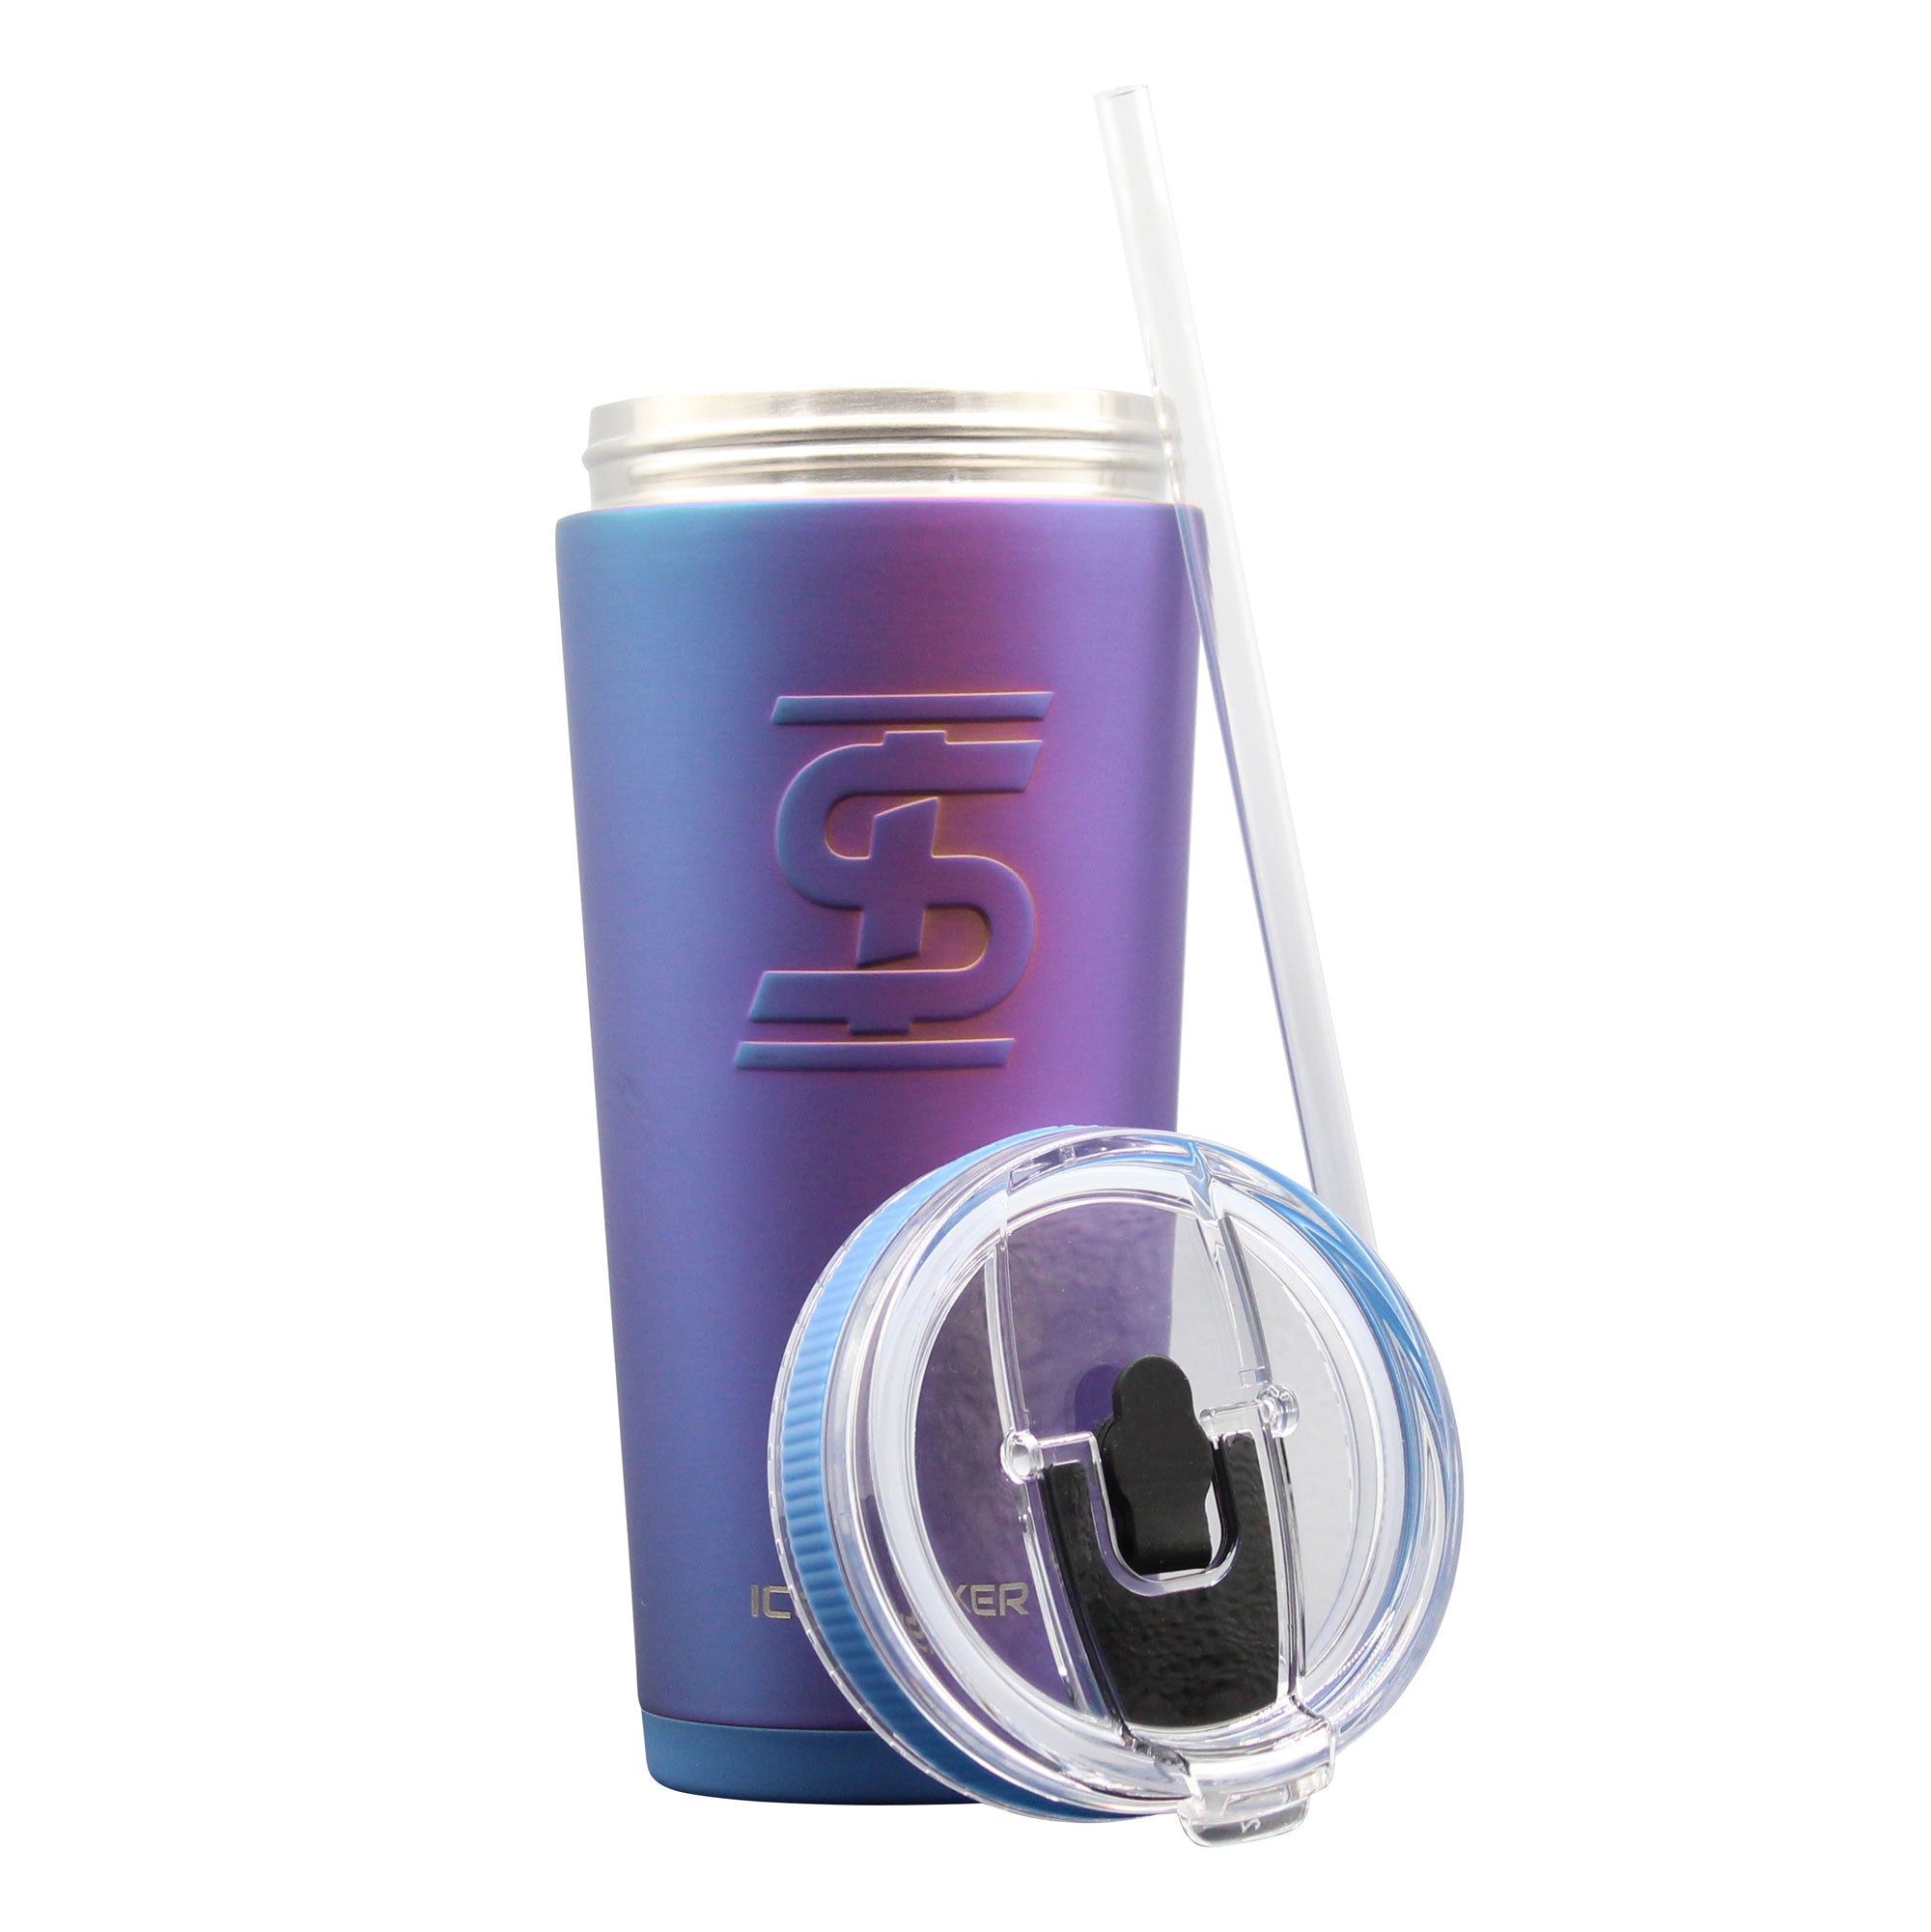 Ice Shaker Stainless Steel Insulated Shaker Cup